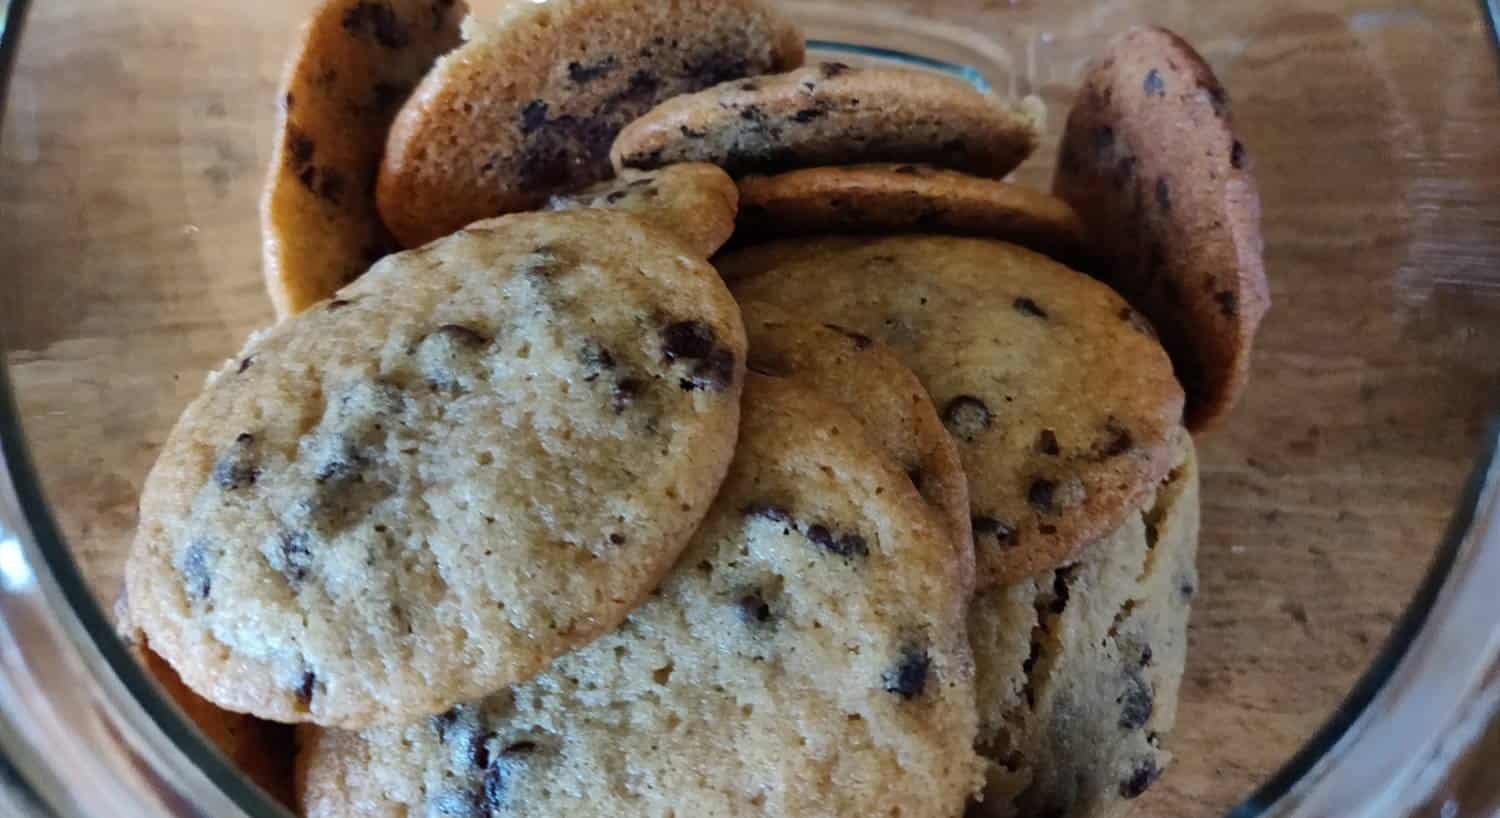 Close up view of chocolate chip cookies in glass bowl